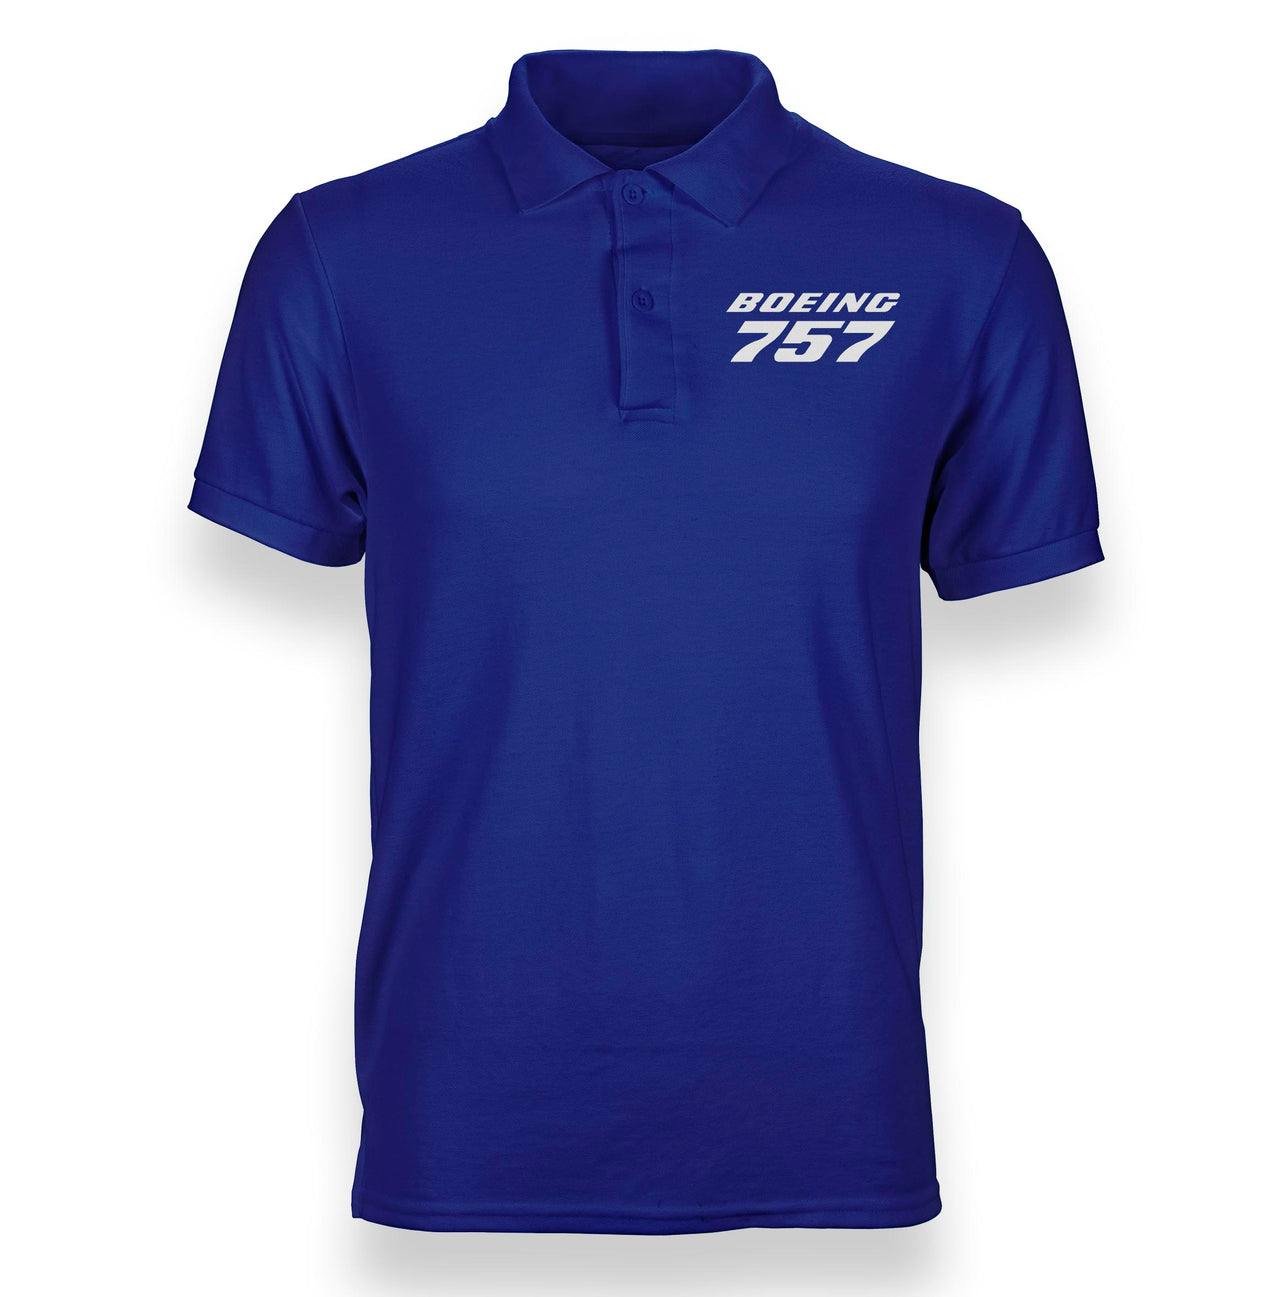 Boeing 757 & Text Designed Polo T-Shirts